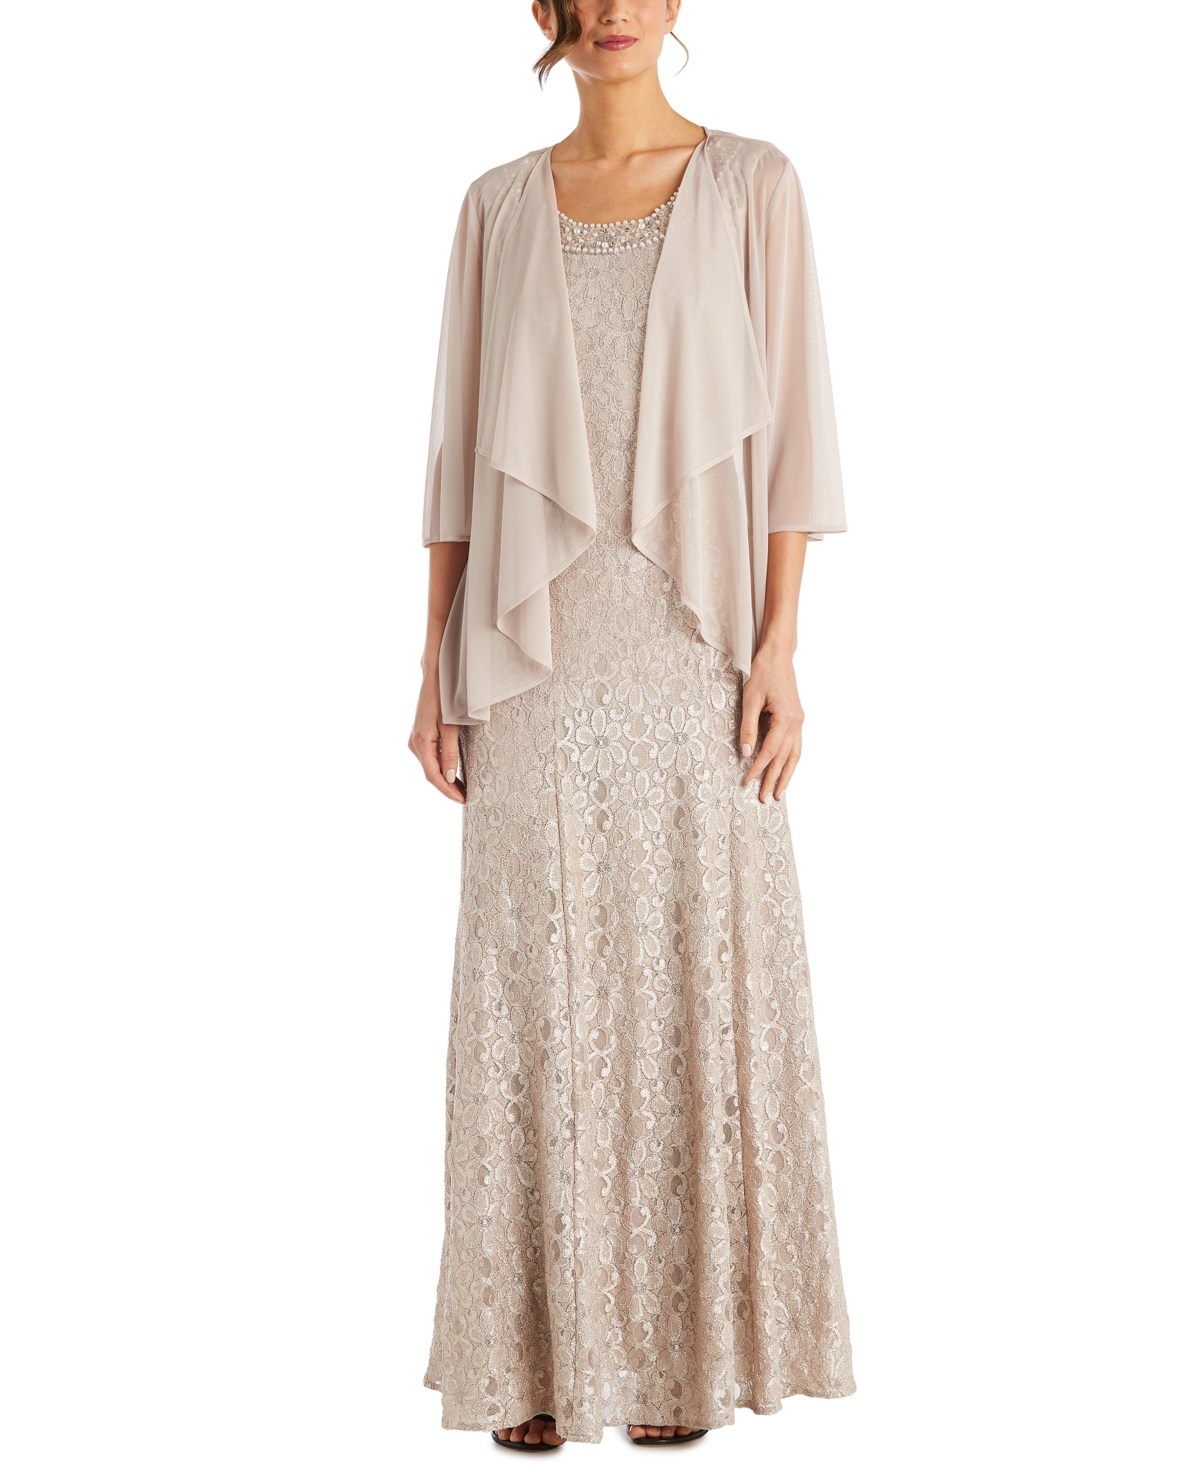 1920s Dress with Sleeves – Modest, Mature, Authentically Inspired 1920s Dresses R  M Richards Womens Beaded Dress  Flyaway Jacket - Champagne $159.00 AT vintagedancer.com